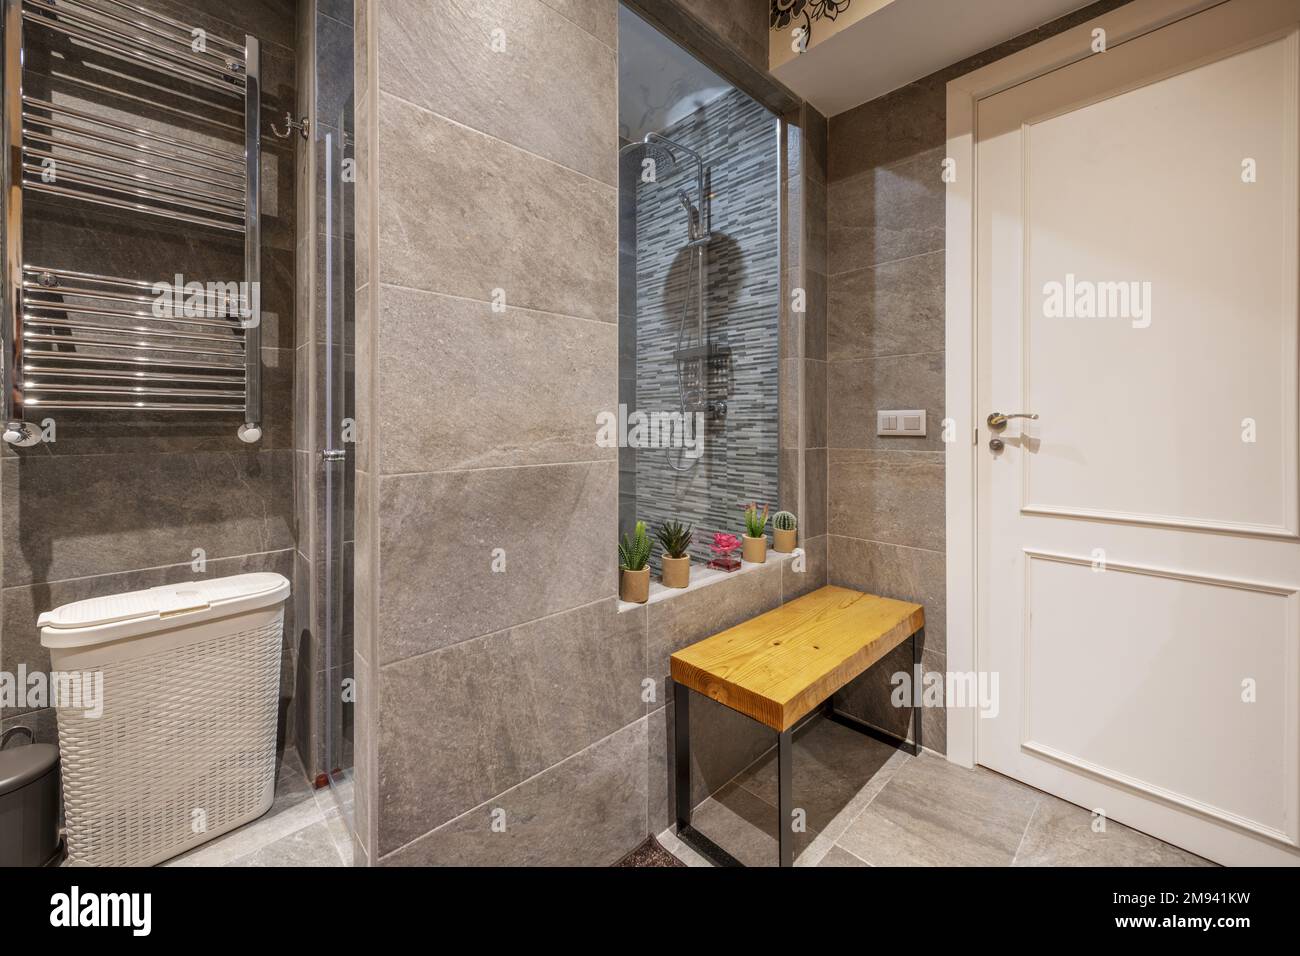 Shower cabin of a bathroom with light slate tiling, wooden plank seat and chrome metal radiator Stock Photo